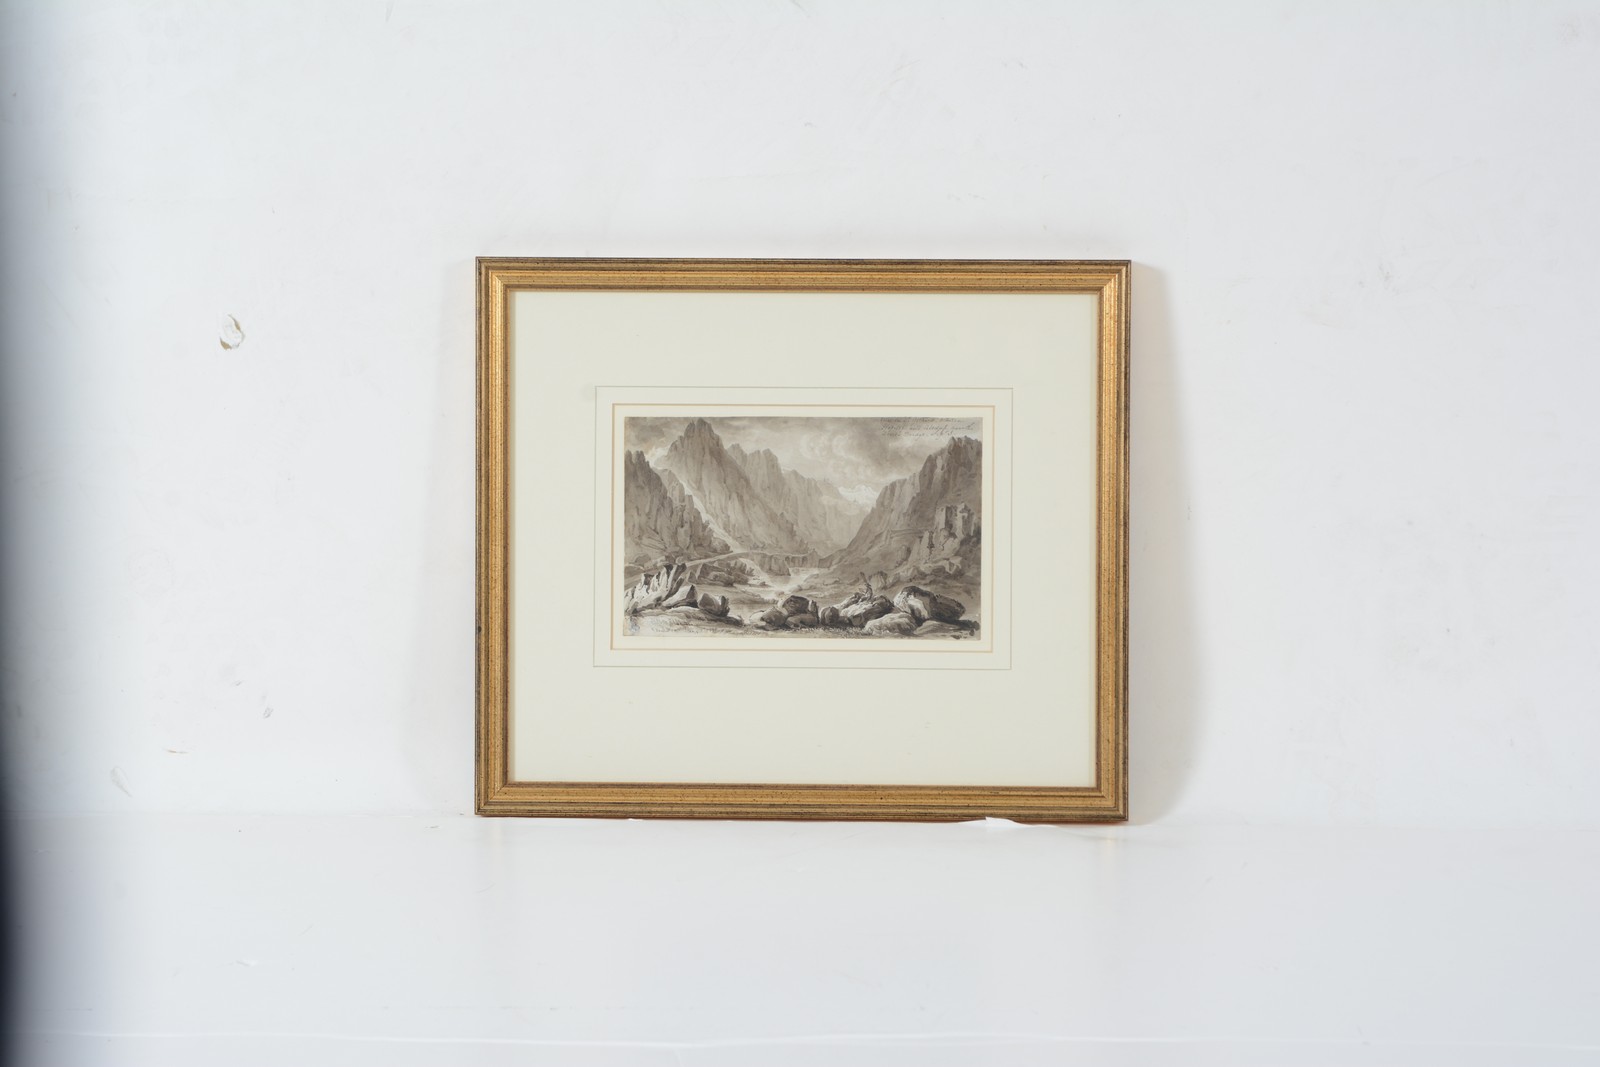 John Townshend (fl. 1814-1850) View from the Promenade at Vevey, Switzerland Pencil on wove paper - Image 2 of 3